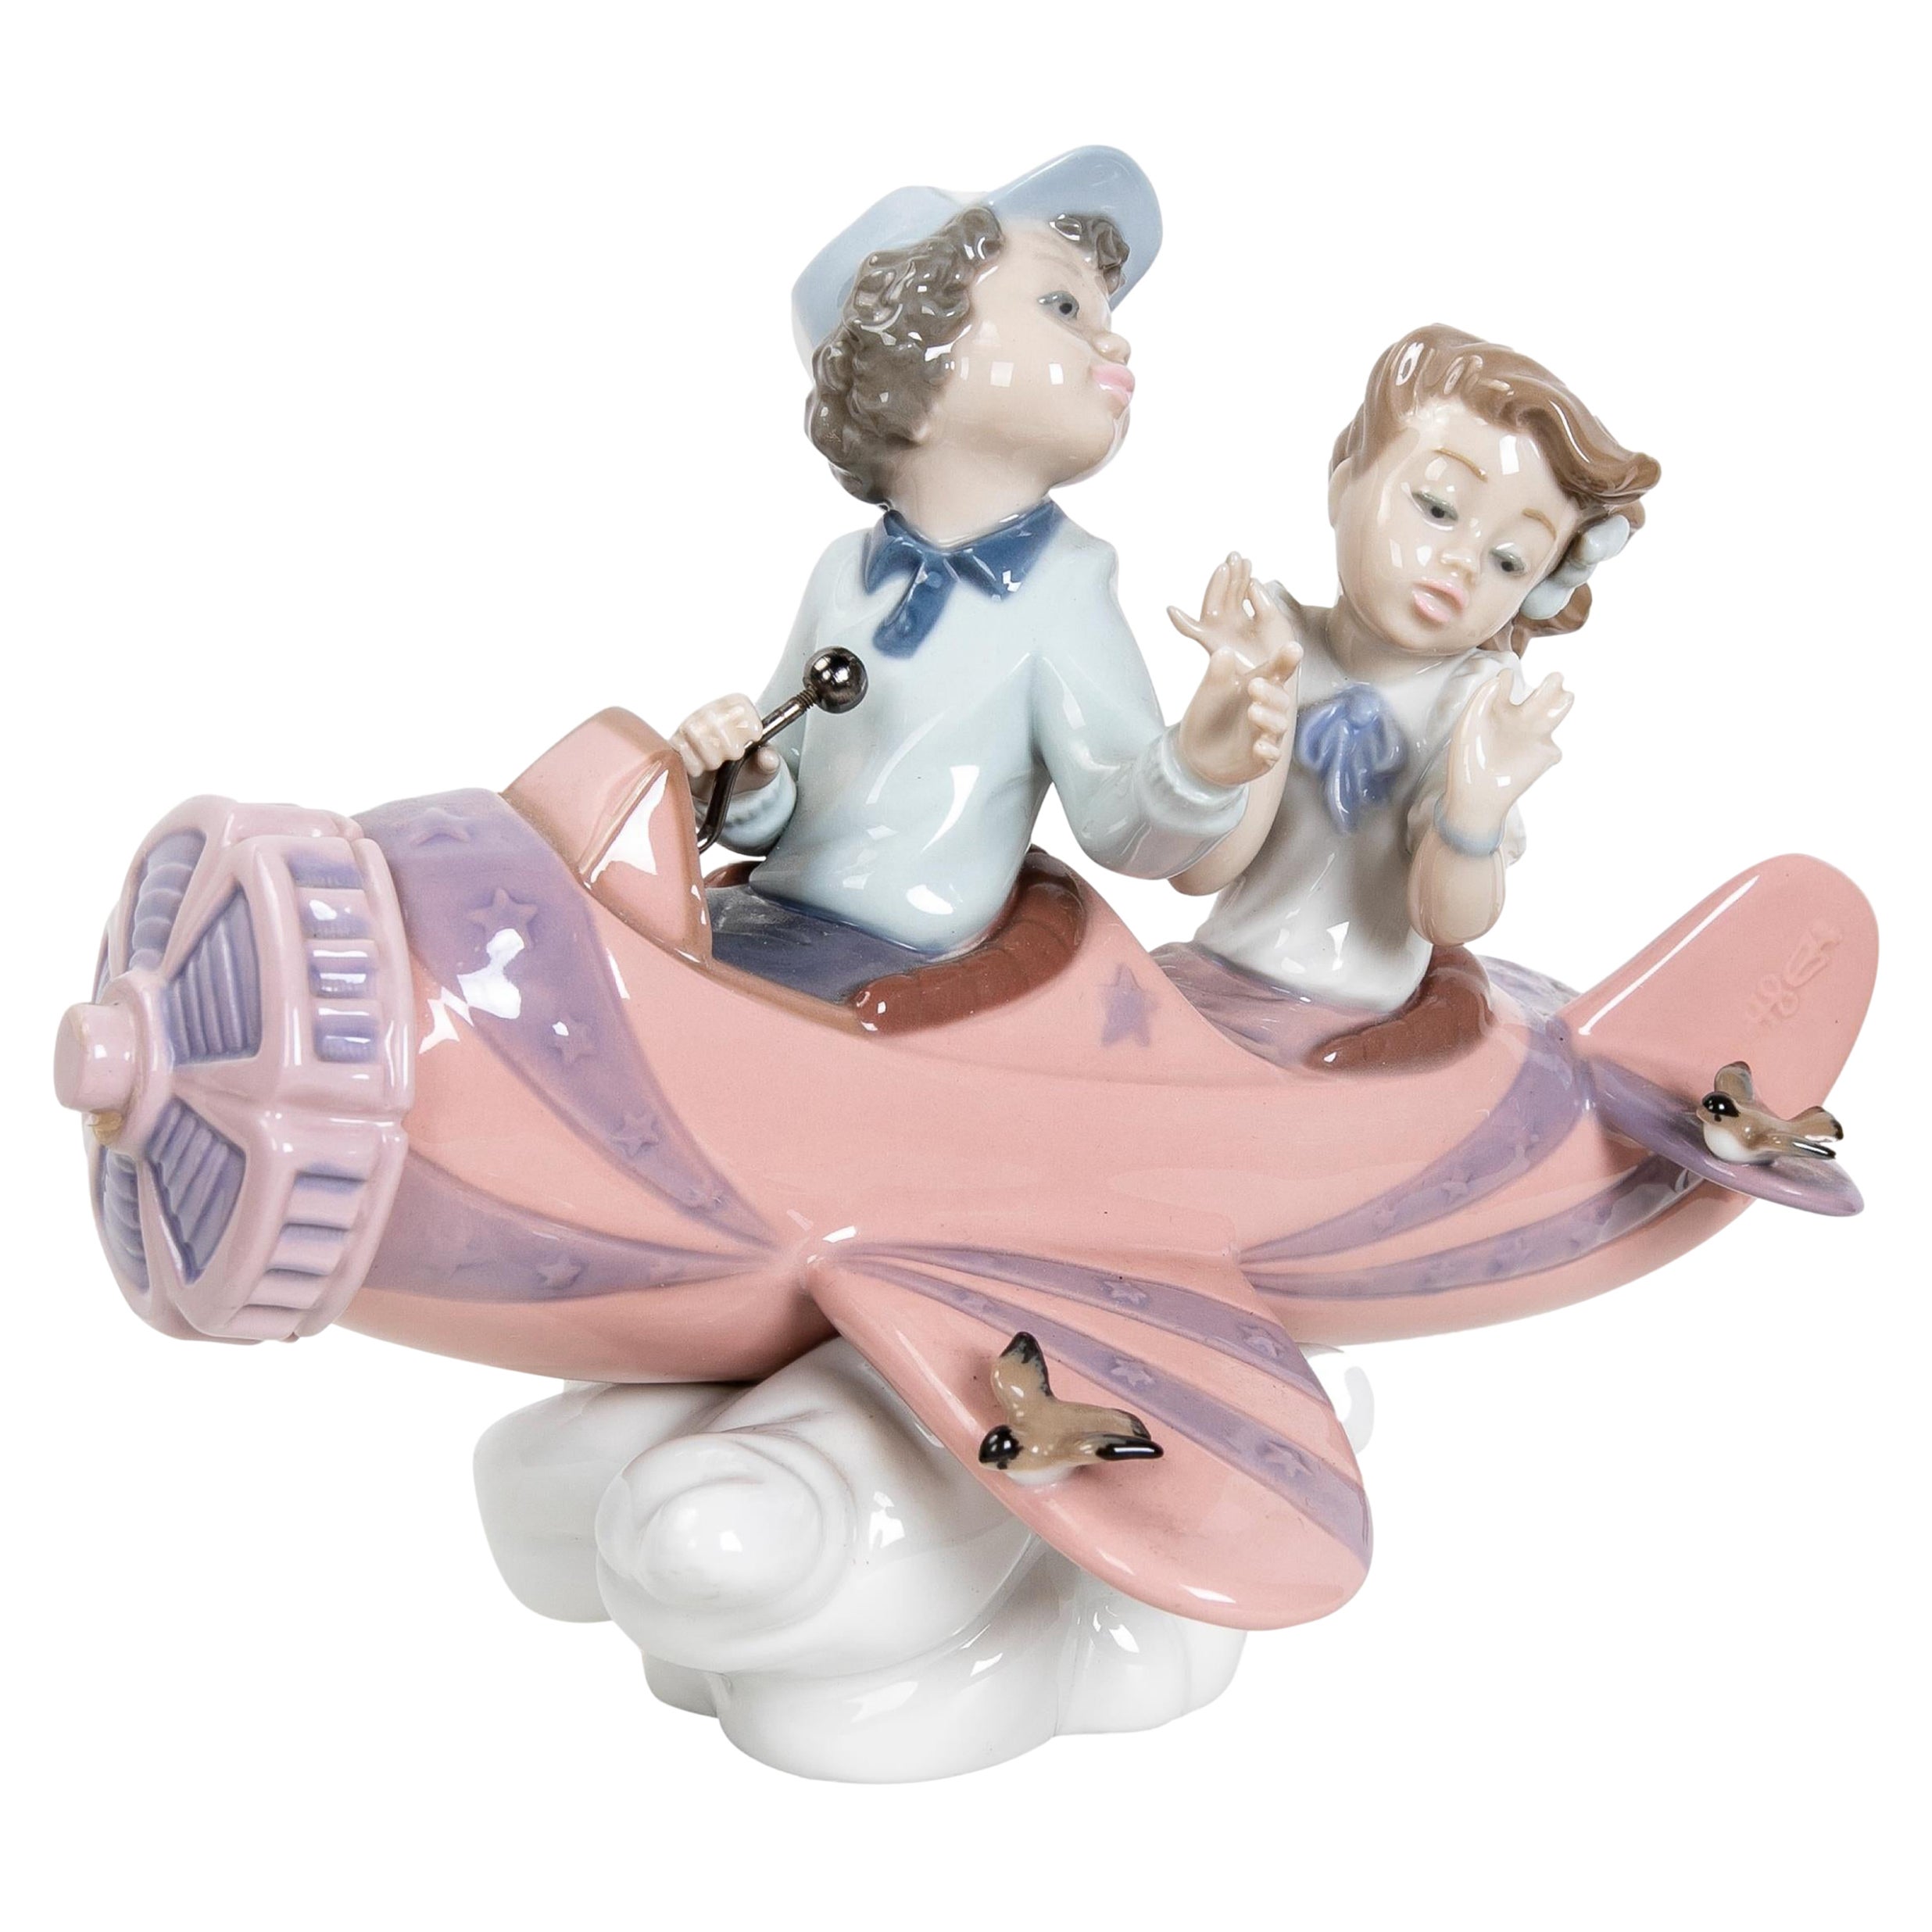 1989 Porcelain Figure of Children in Airplane Signed by the House of LLadró